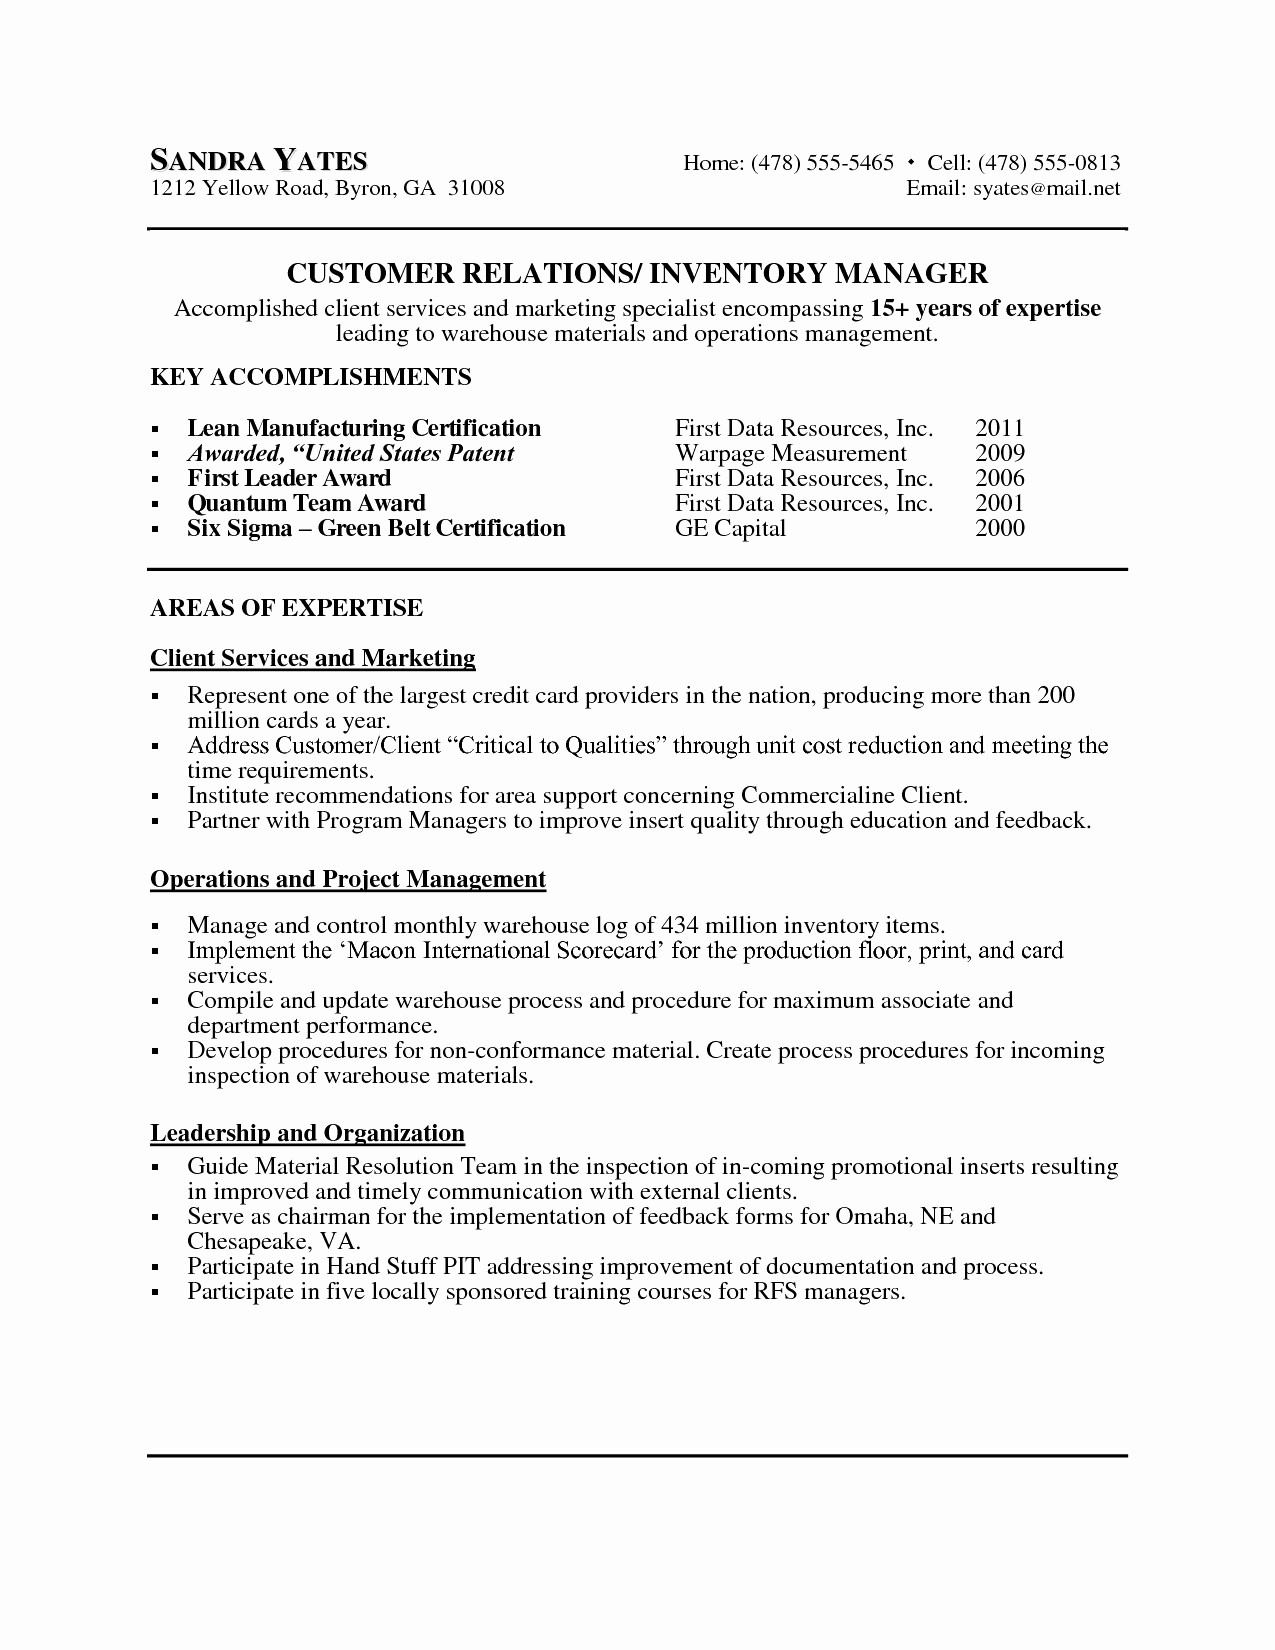 Application Letter Template - Cover Letter Examples for Resumes Luxury 20 Resume with Cover Letter